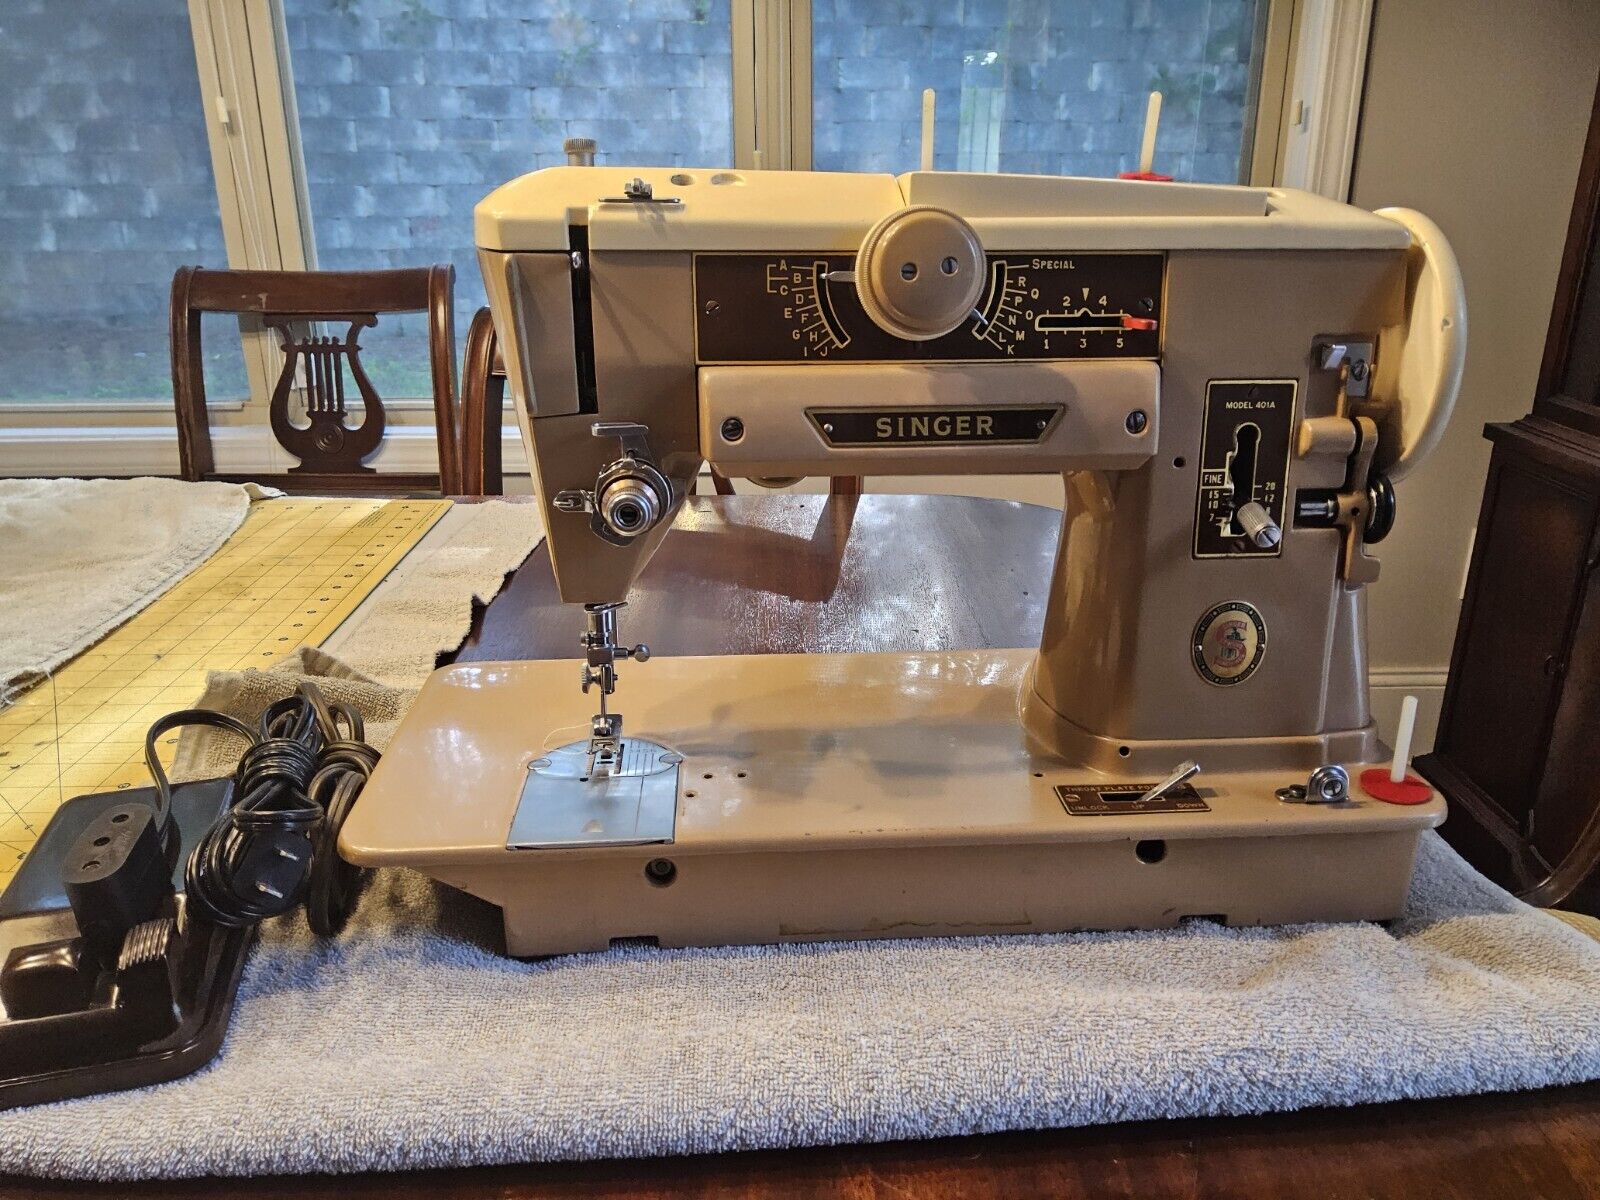 Singer 401a sewing machine cleaned and serviced FAIR cond SN NB772402